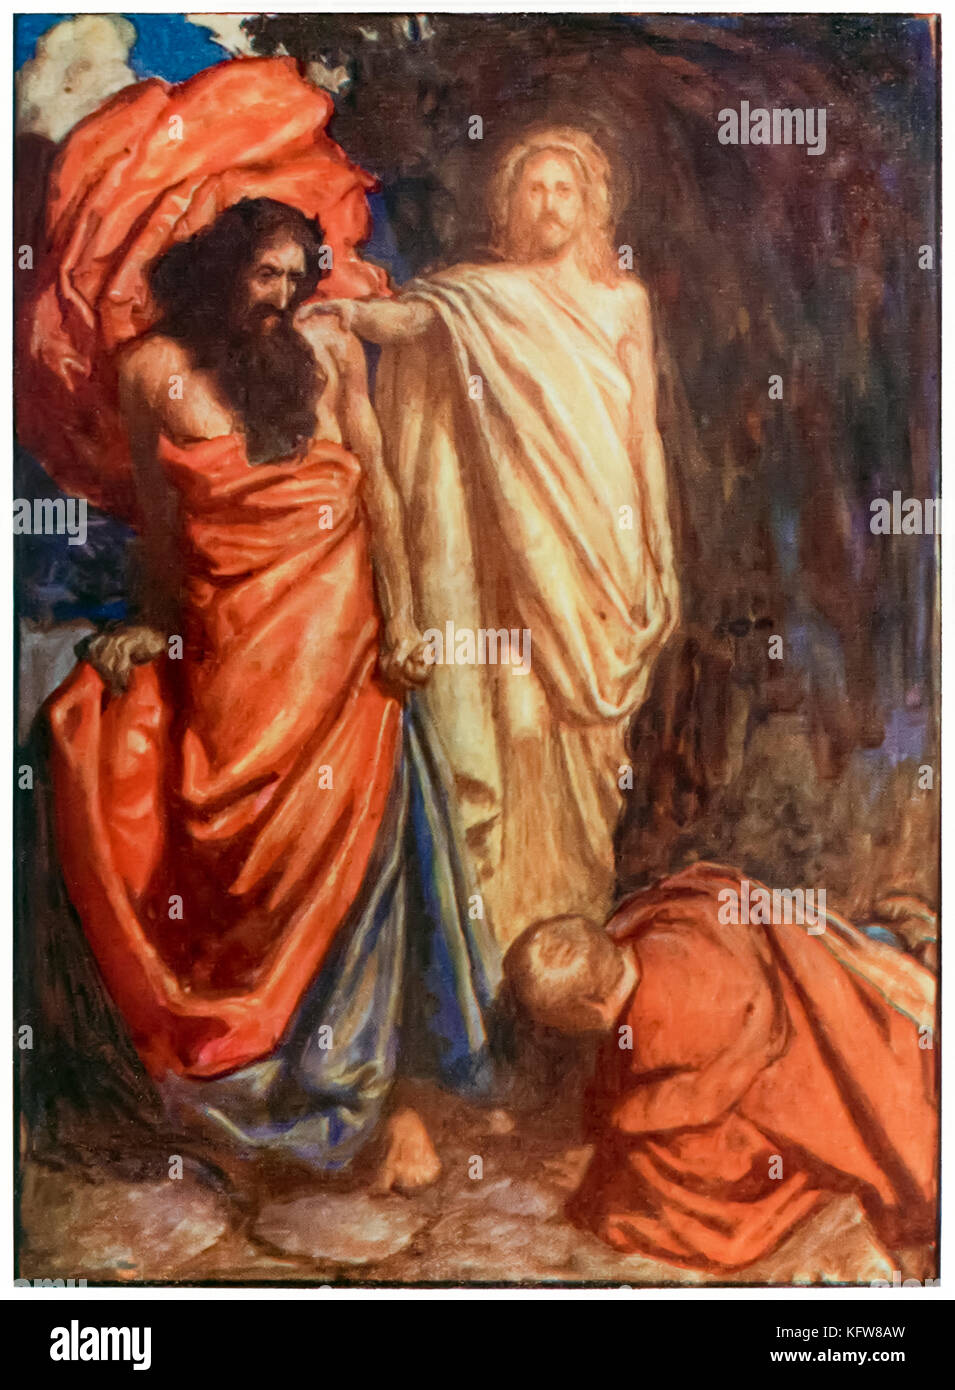 “Faithful struck down by Moses” from ‘The Pilgrim’s Progress From This World, To That Which Is To Come’ by John Bunyan (1628-1688). Illustration by Byam Shaw (1872-1919) showing Faithful beaten by an unmerciful Moses, teaching him that the Law offers no help and that the flesh is weak. See more information below. Stock Photo